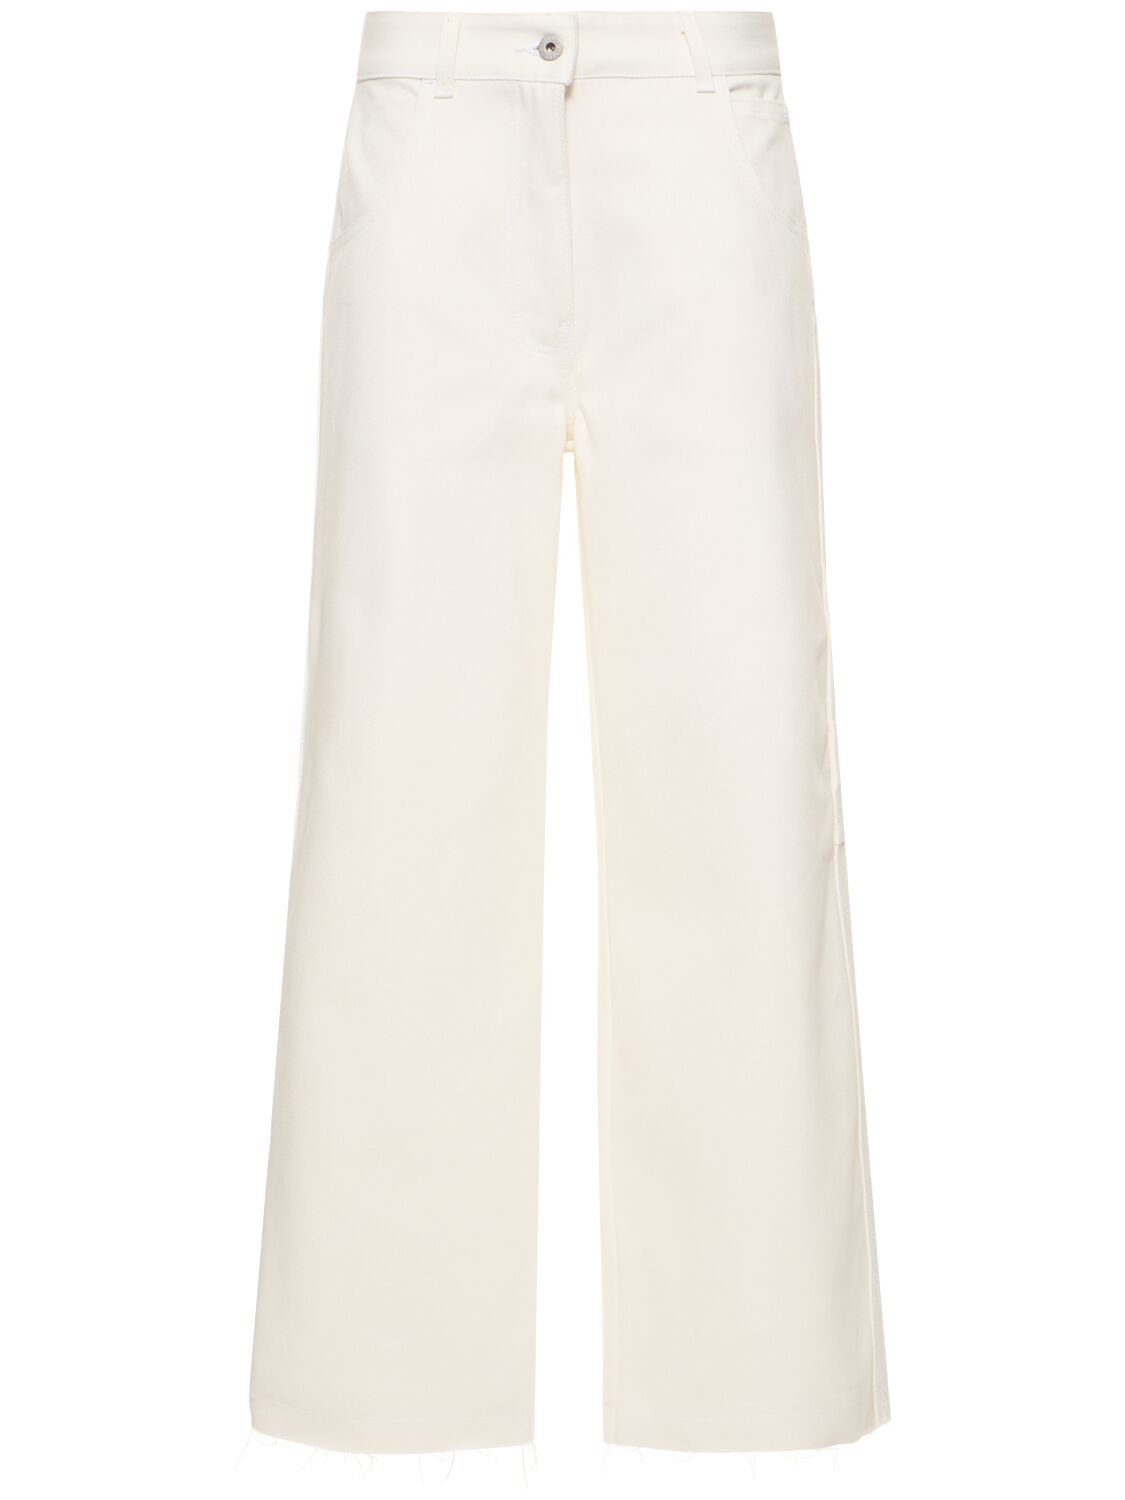 The Clarice Cotton Wide Pants